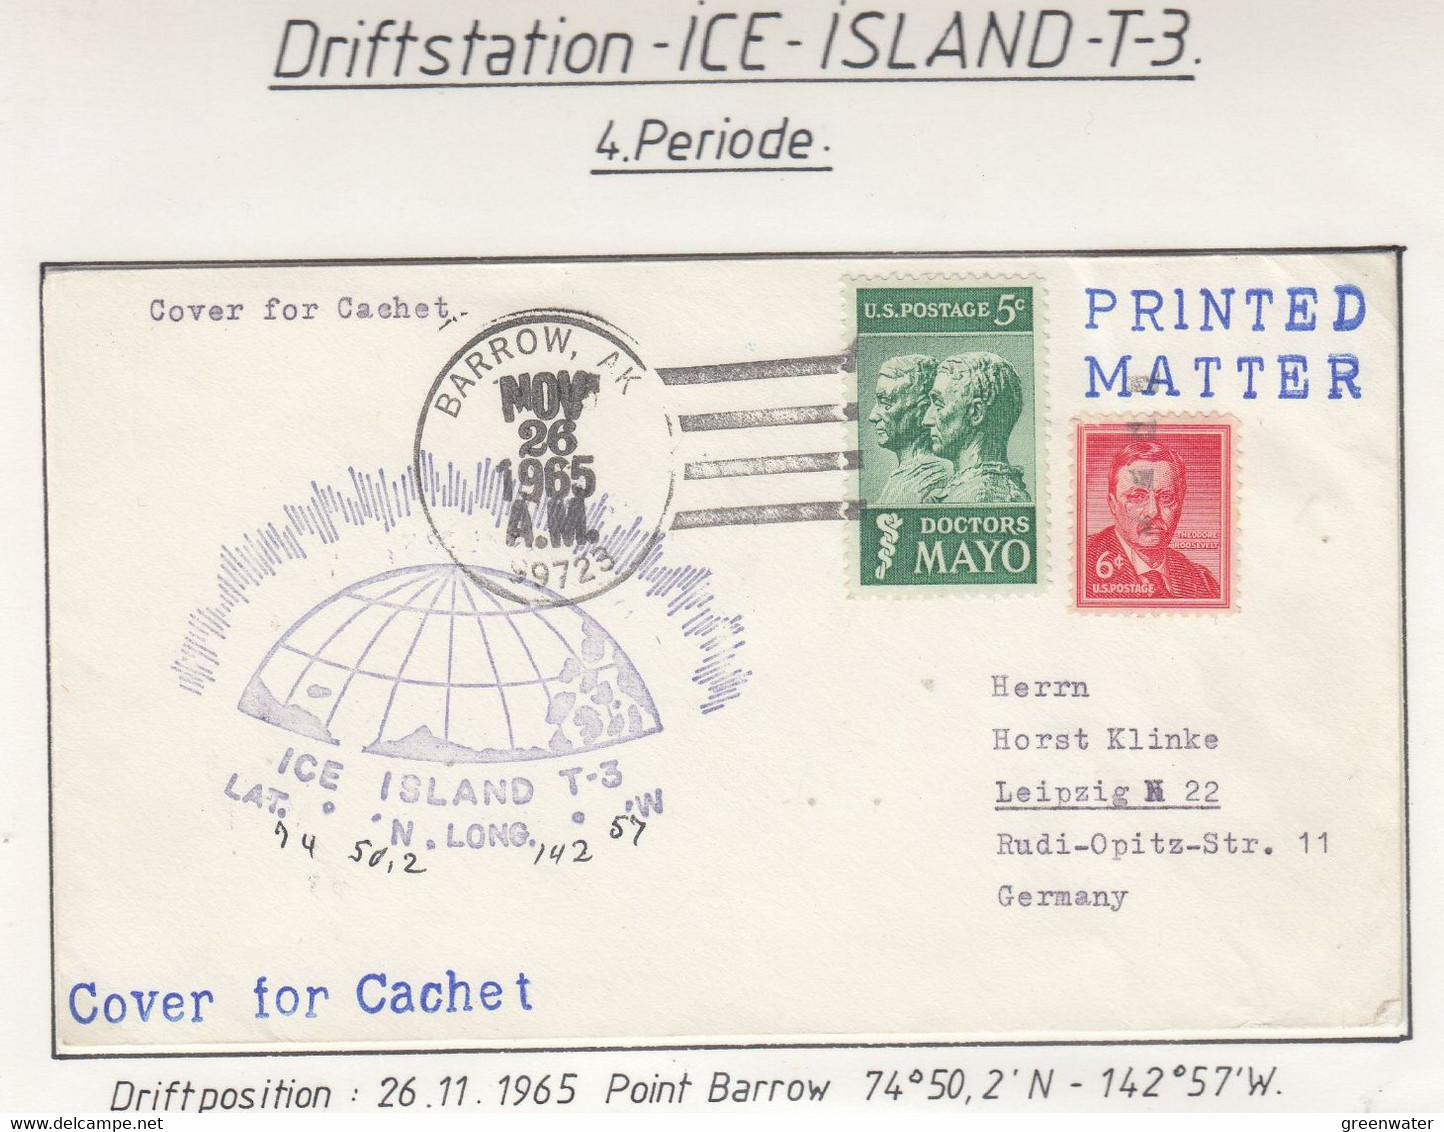 USA Driftstation ICE-ISLAND T-3 Cover Ice Island T3-Periode 4 Ca NOV 261965  (DR117B) - Scientific Stations & Arctic Drifting Stations